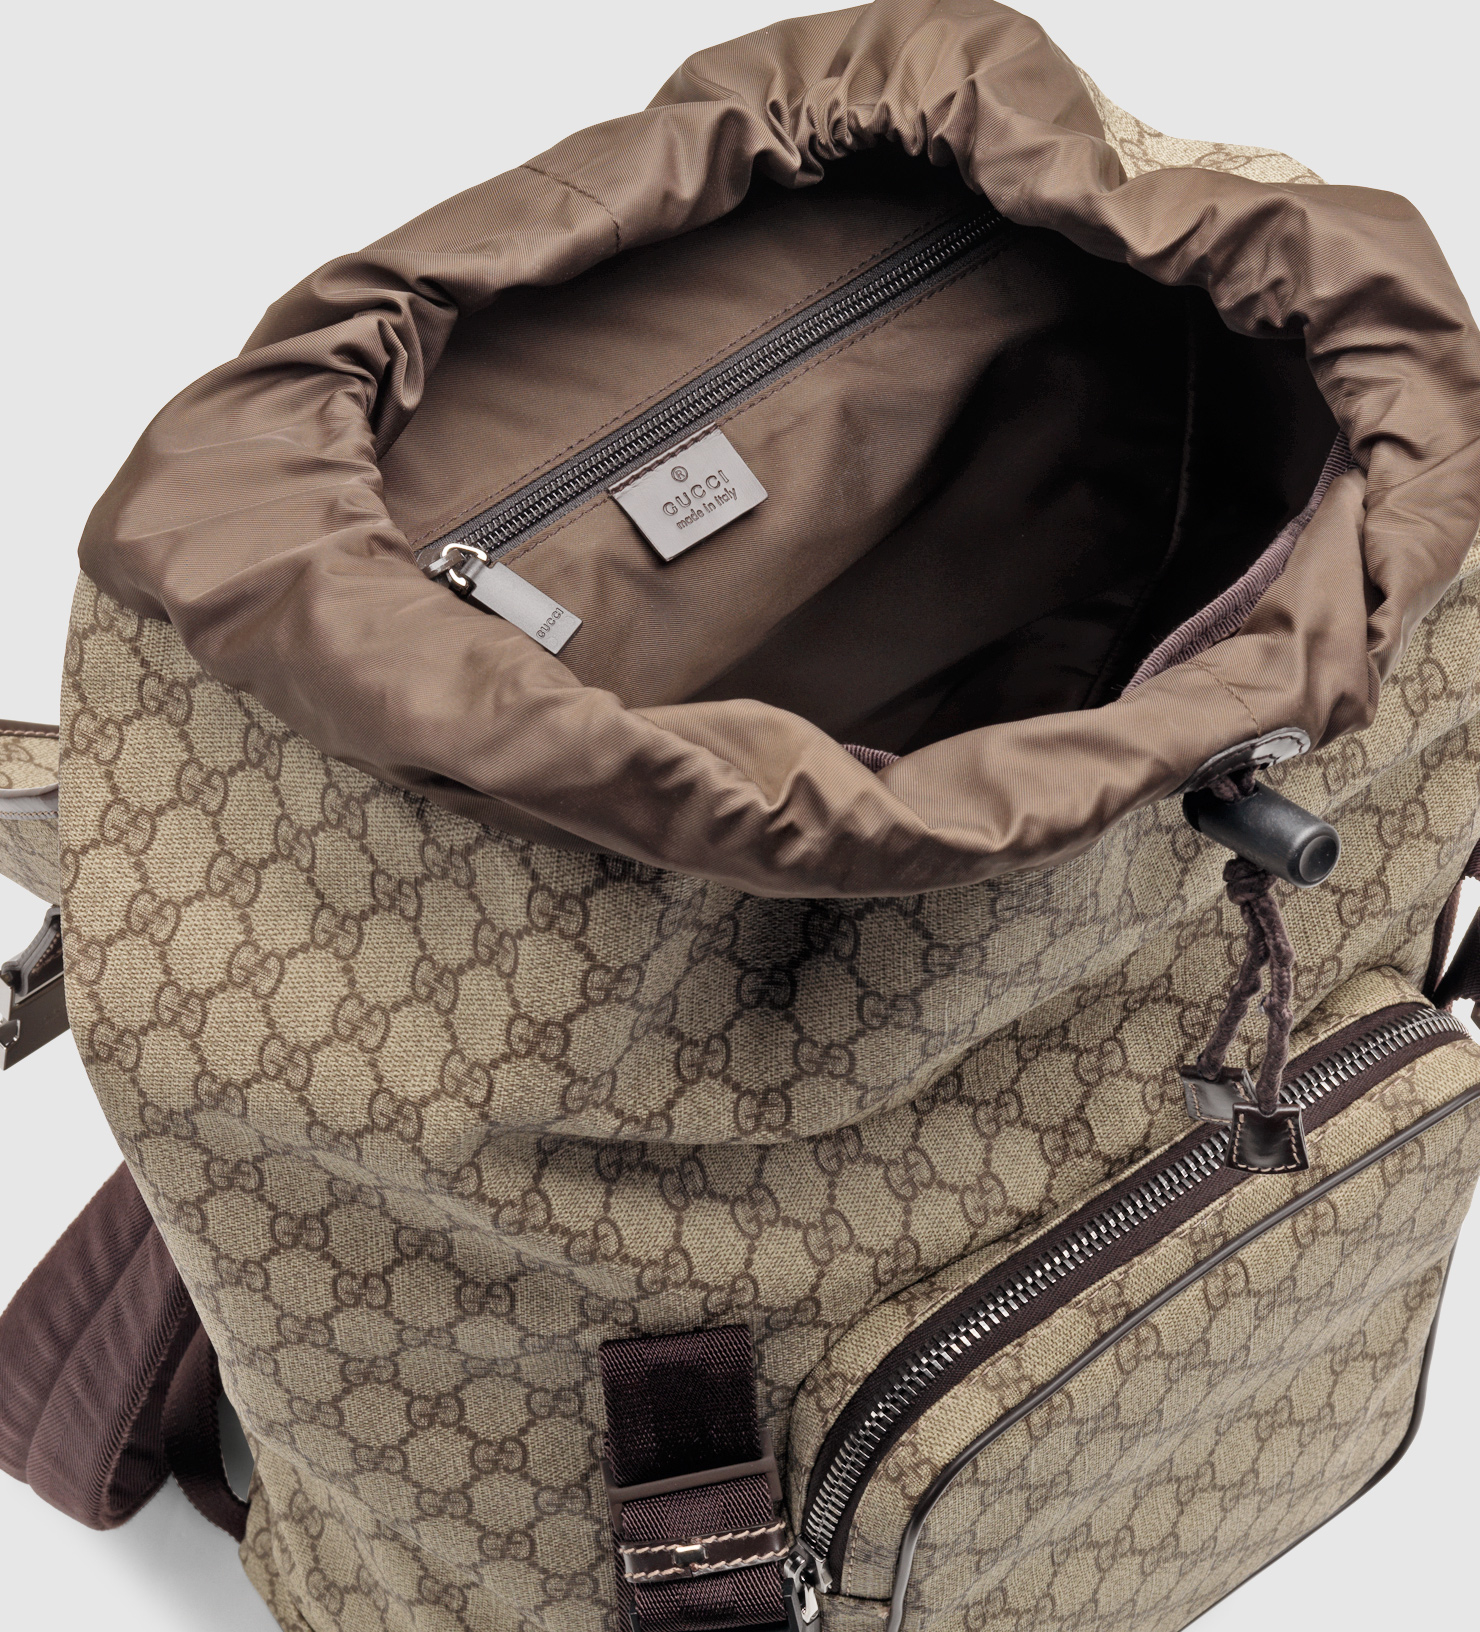 Sling backpack with Interlocking G in beige and ebony Supreme